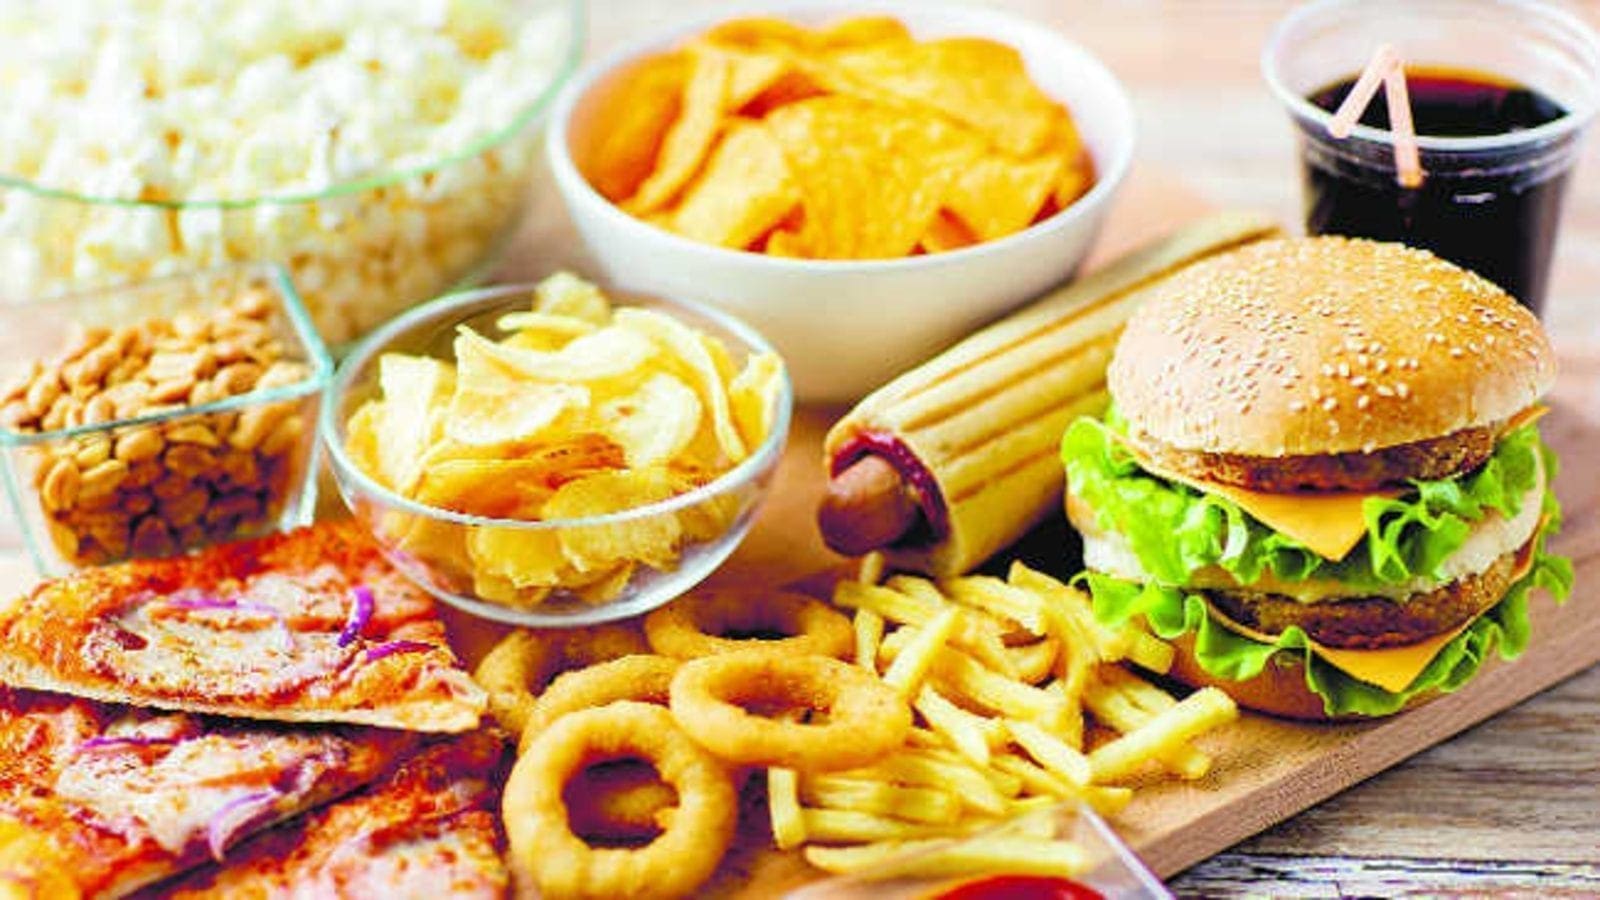 High consumption of ultra-processed foods exposes you to dementia risk, new study finds